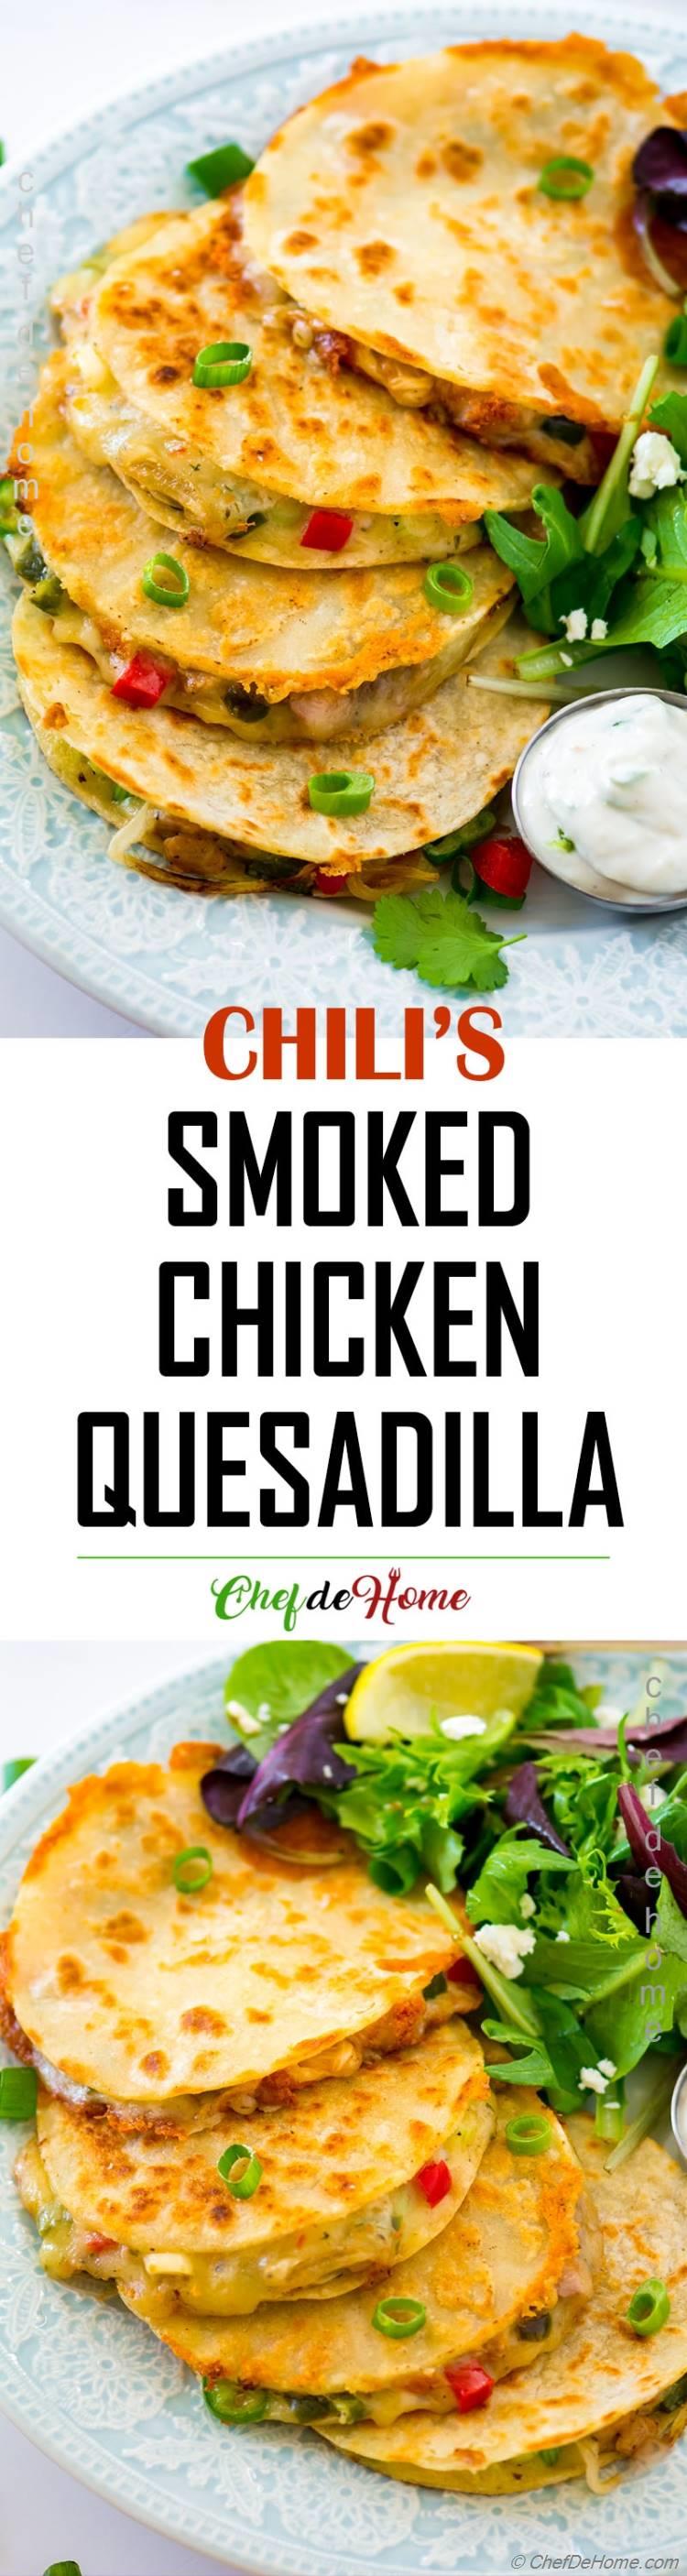 Spicy Smoked Chicken Quesadilla